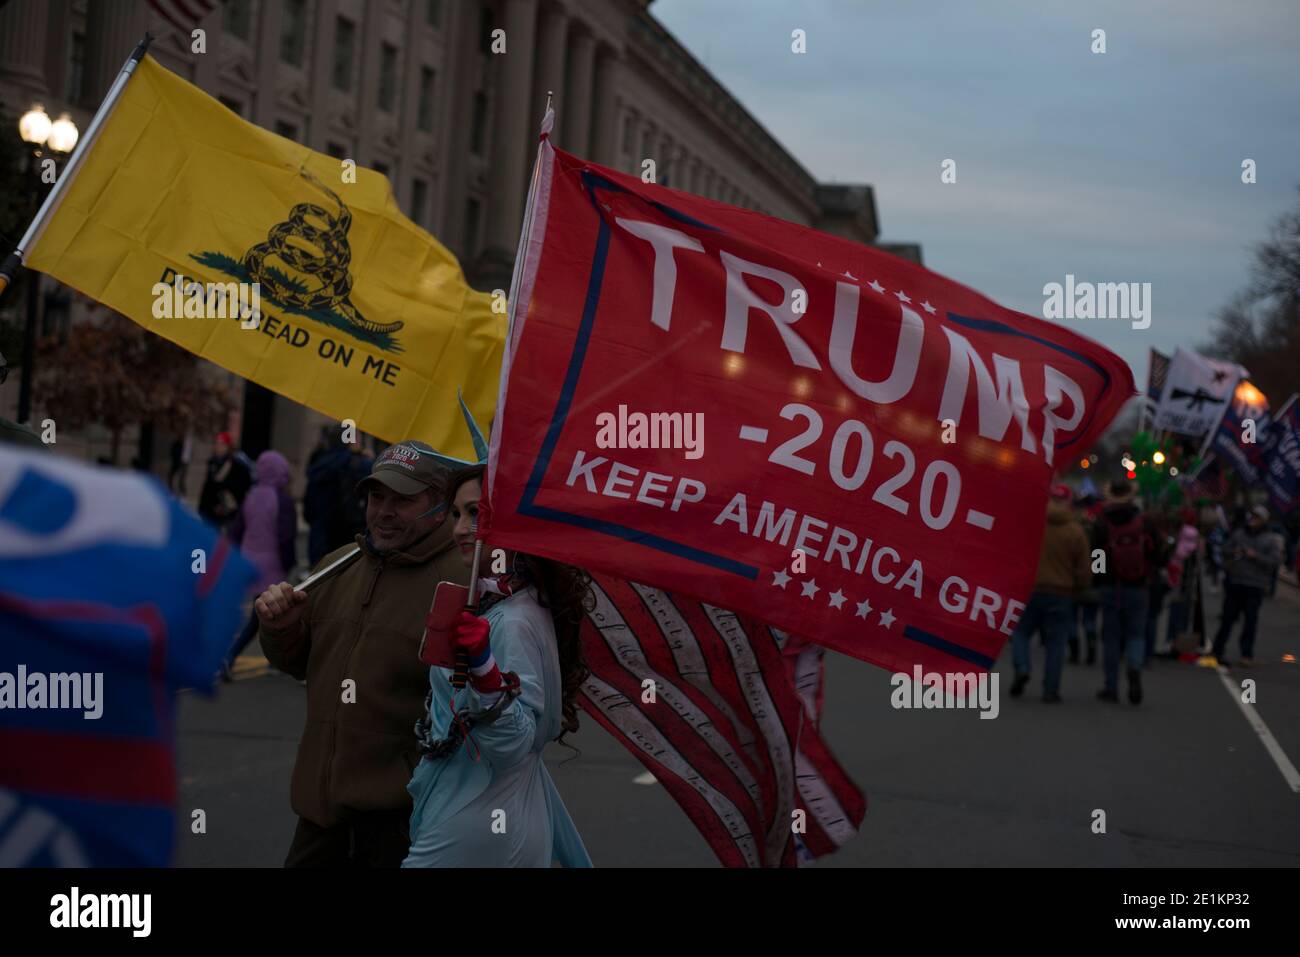 January 6th 2021. Trump Supporters with Trump 2020 & Don't Tread on Me flags at 'Save America' Pro Trump rally at US Capital. Washington DC.USA. Stock Photo